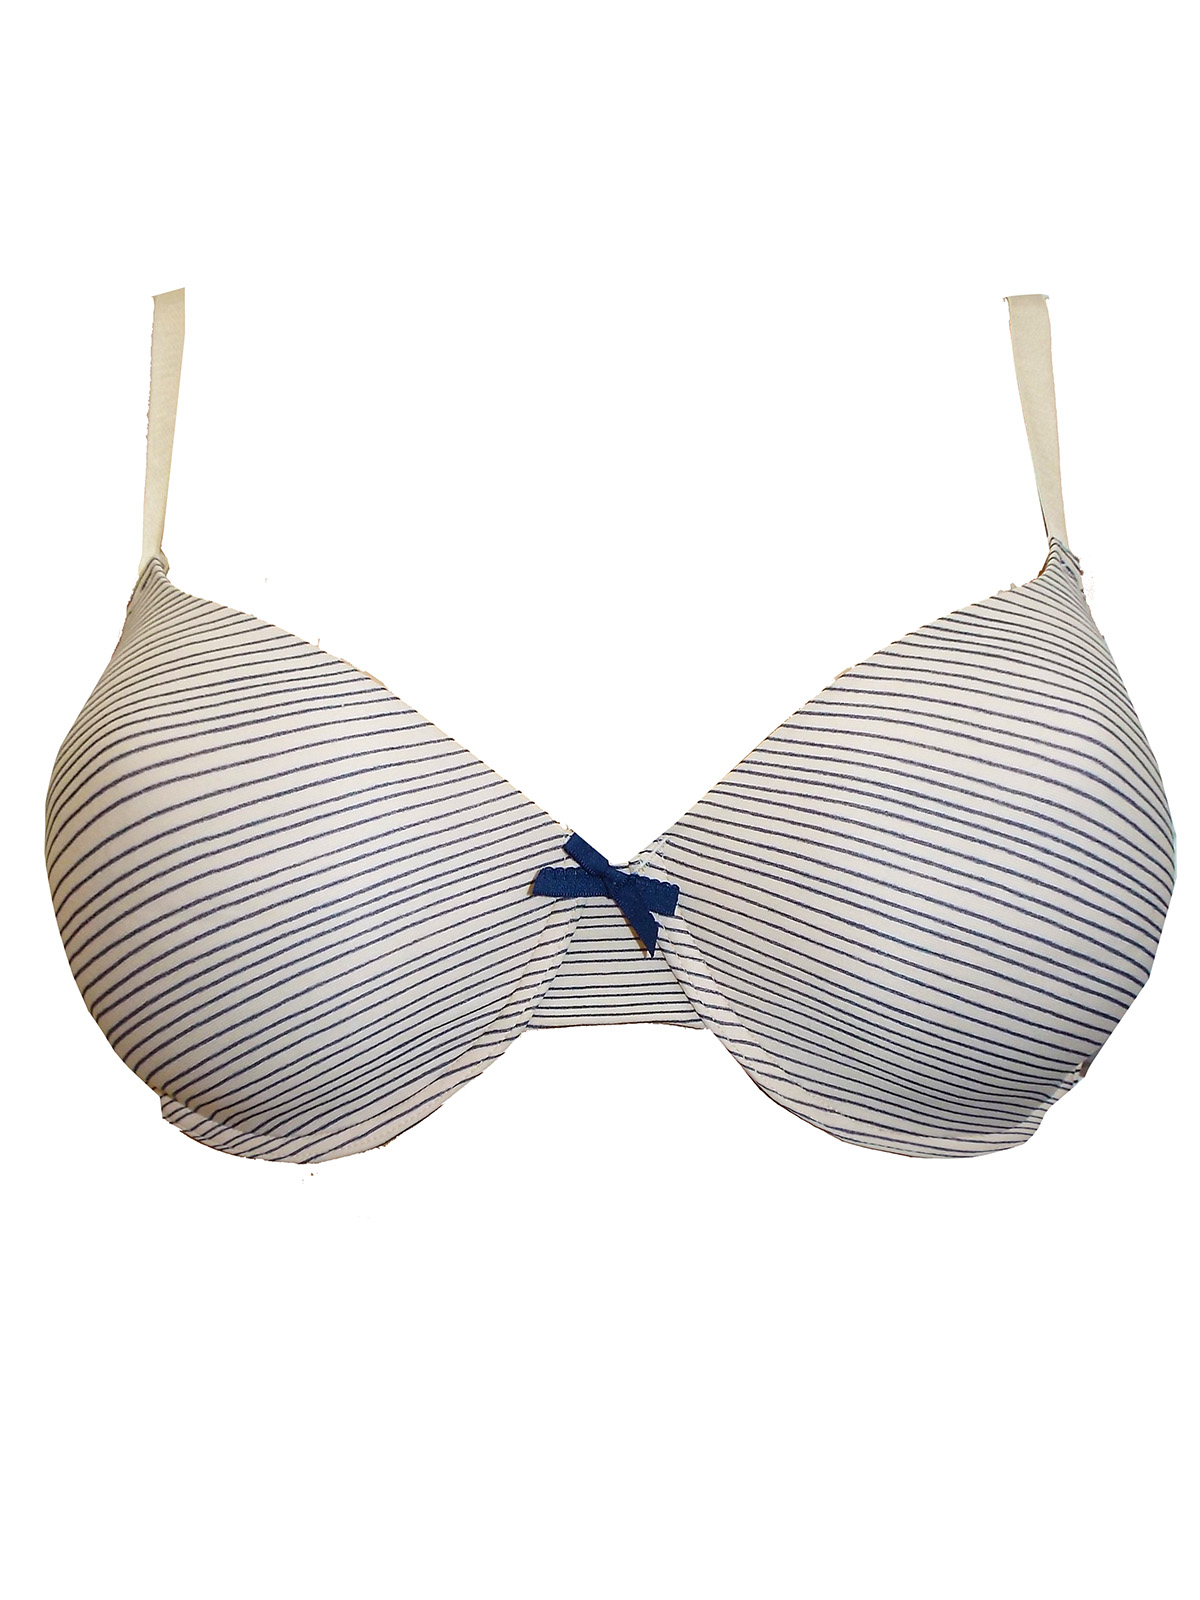 Ellen Tracy - - Ellen Tracy NUDE Striped Padded & Wired T-Shirt Bra - Size  36 to 38 (D cup)